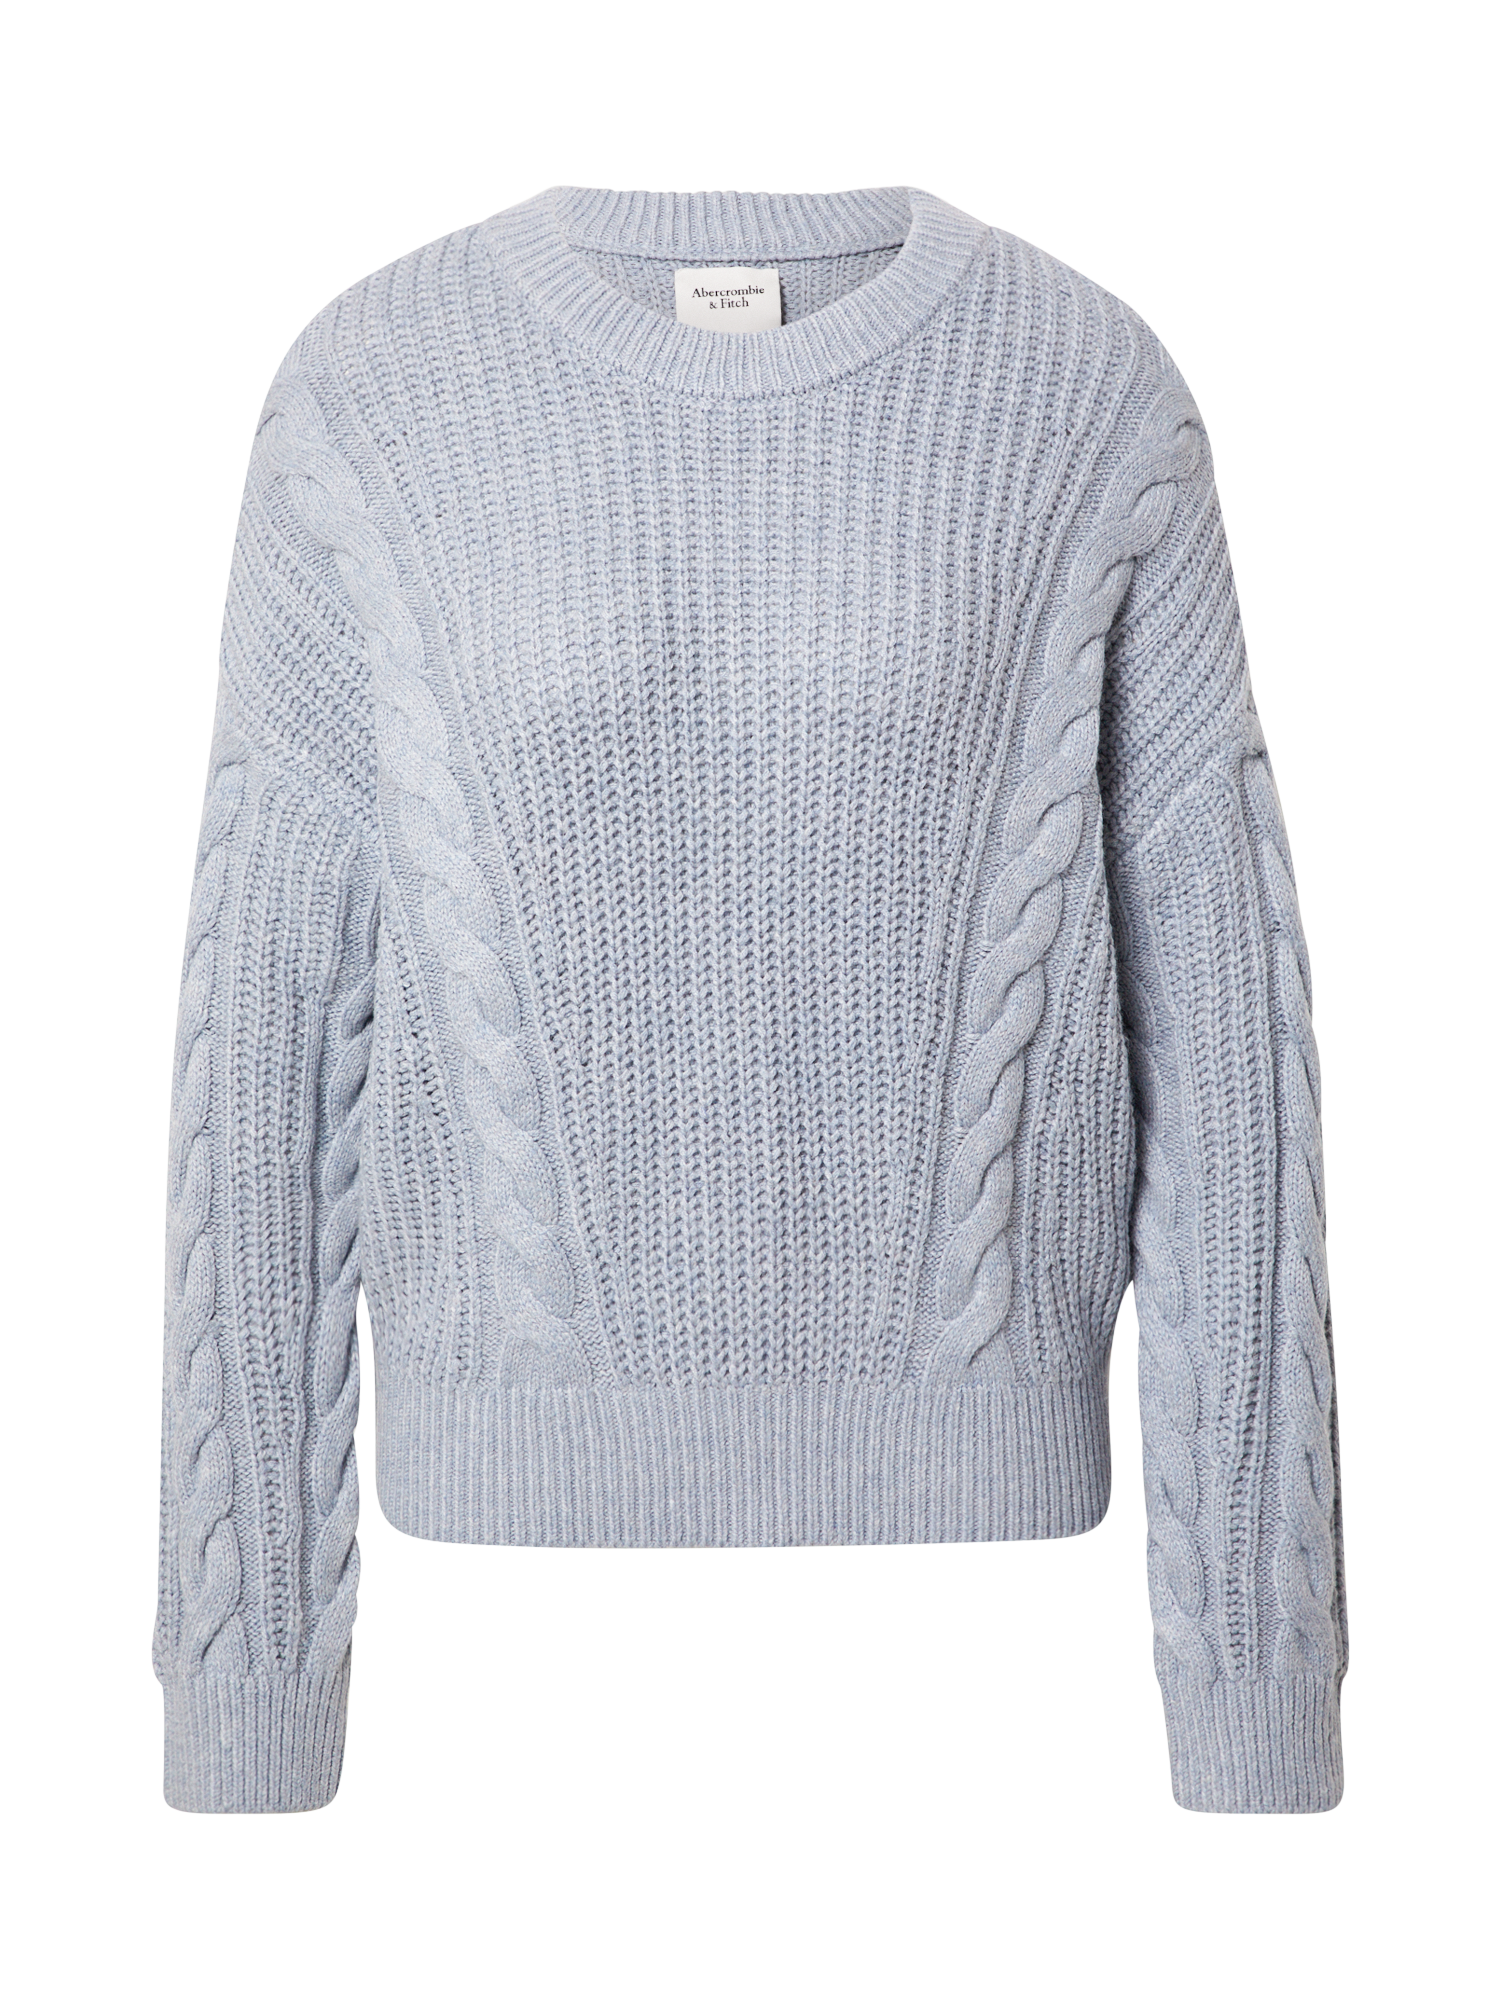 KS3G4 Donna Abercrombie & Fitch Pullover in Opale 